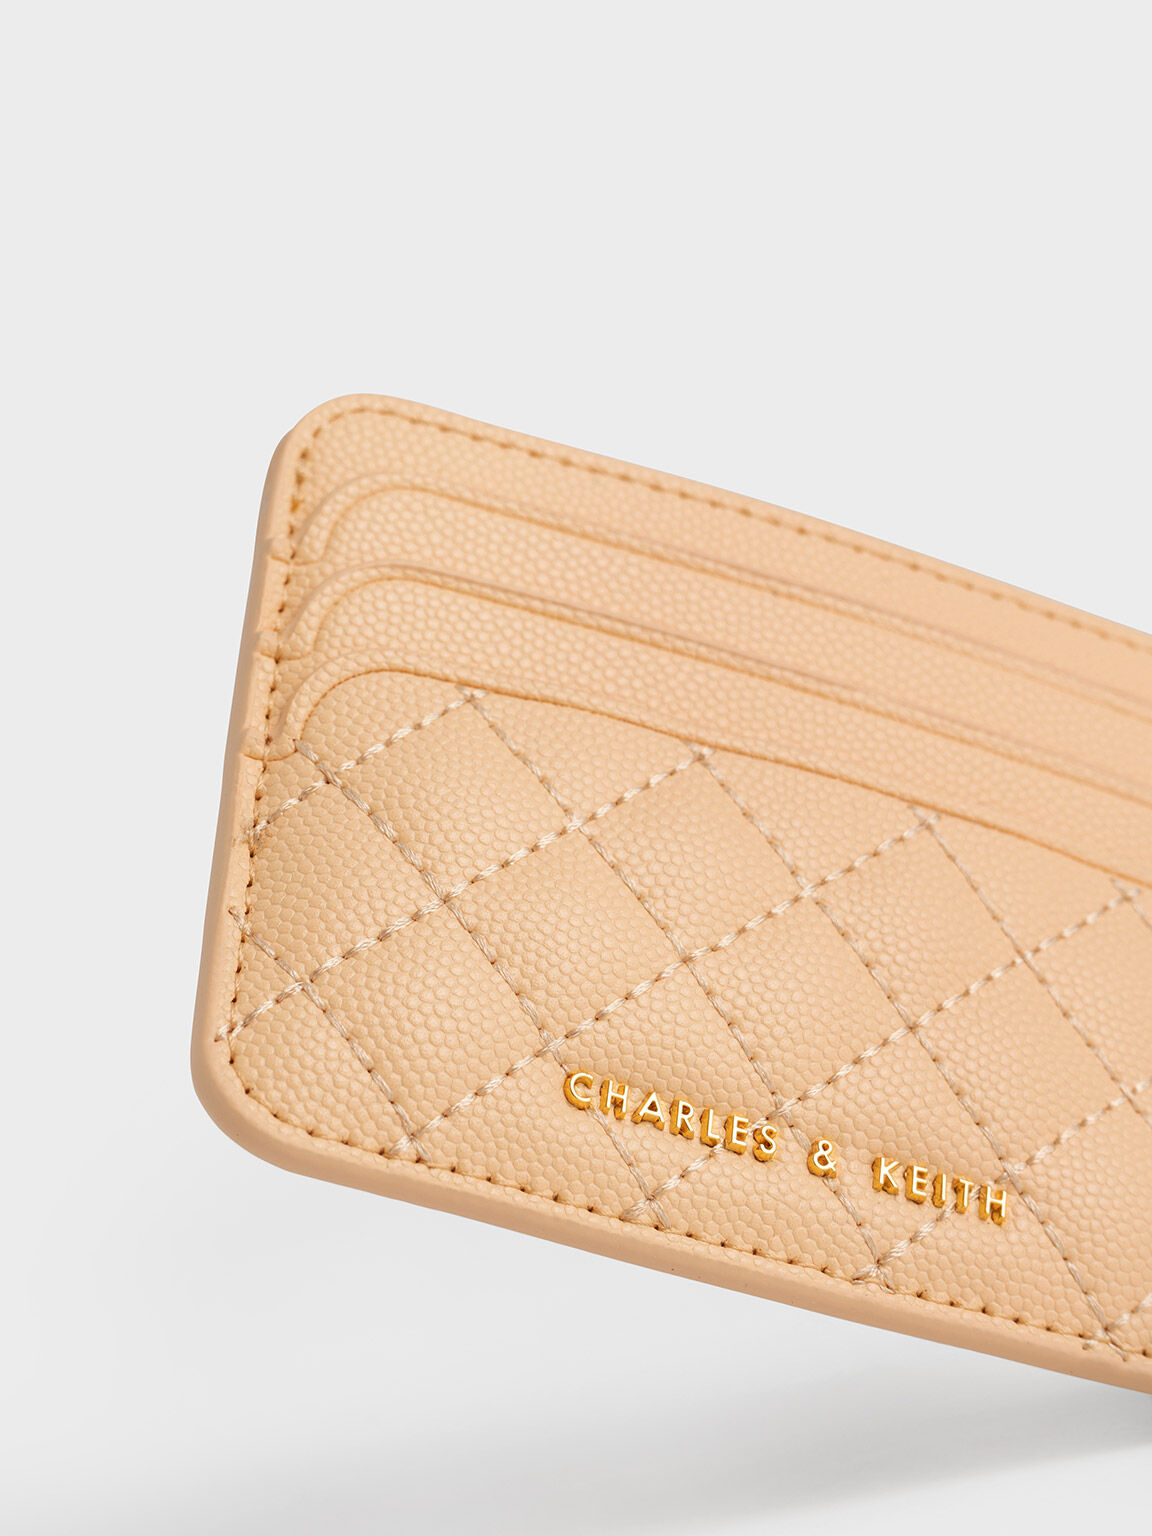 Dompet Kartu Quilted, Yellow, hi-res